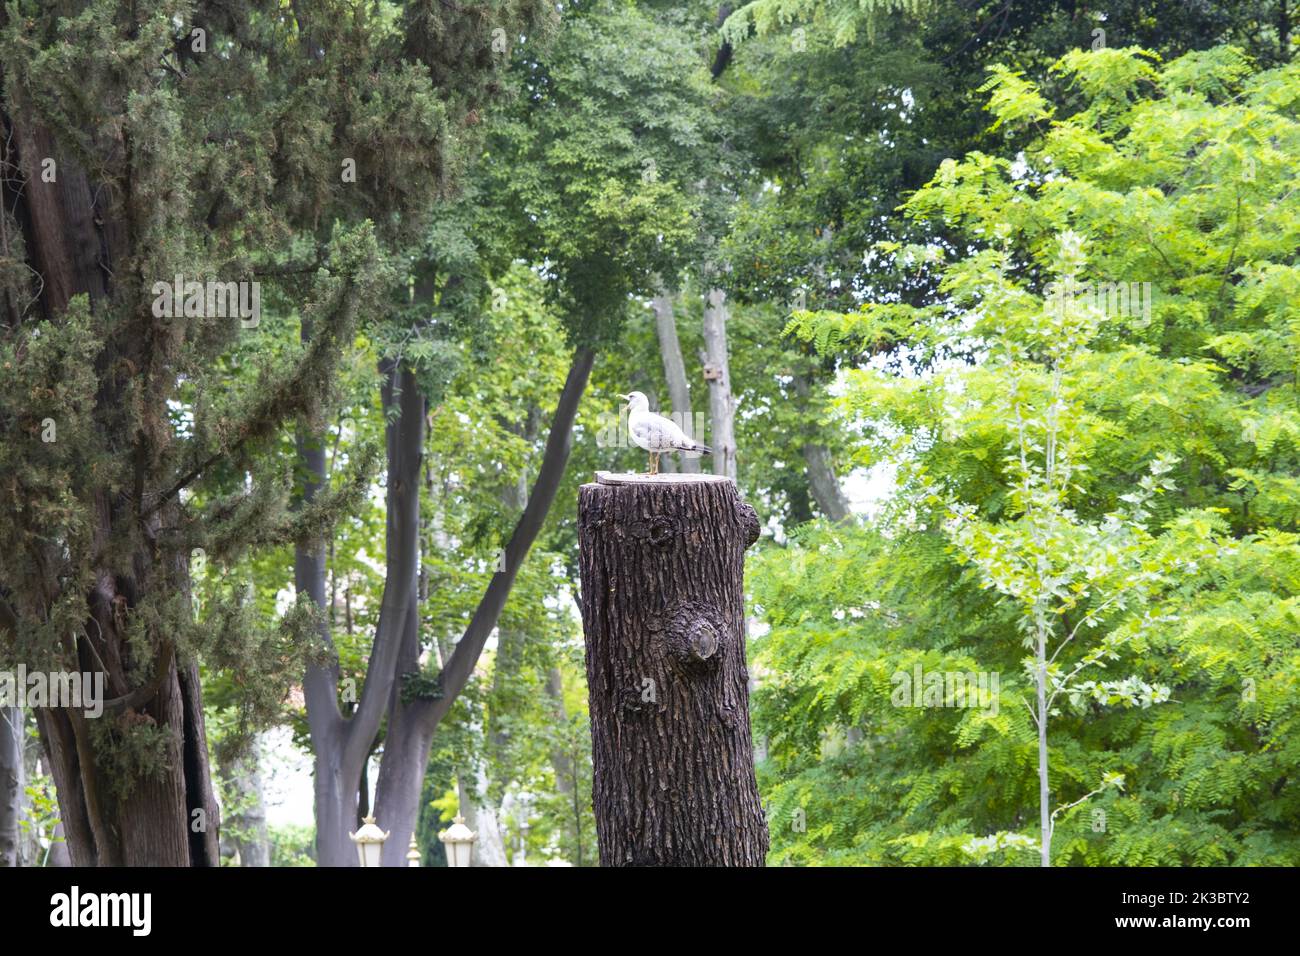 Seagull standing on cutted tree log, selective focus, green leaves, bird and wildlife concept, nature life, outdoor footage in Gulhane park Stock Photo